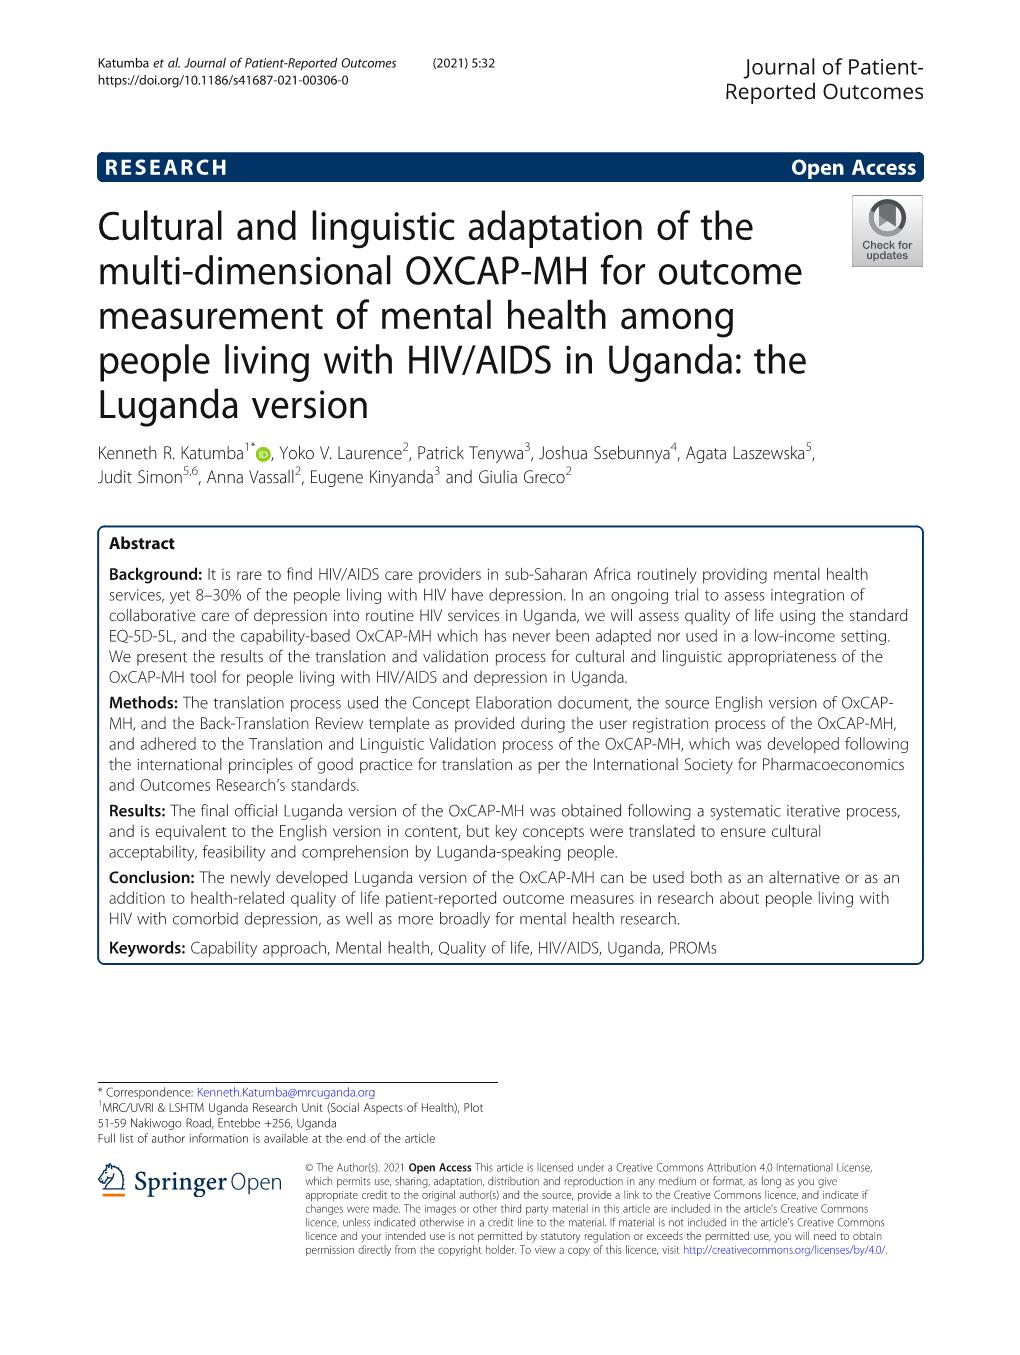 Cultural and Linguistic Adaptation of the Multi-Dimensional OXCAP-MH